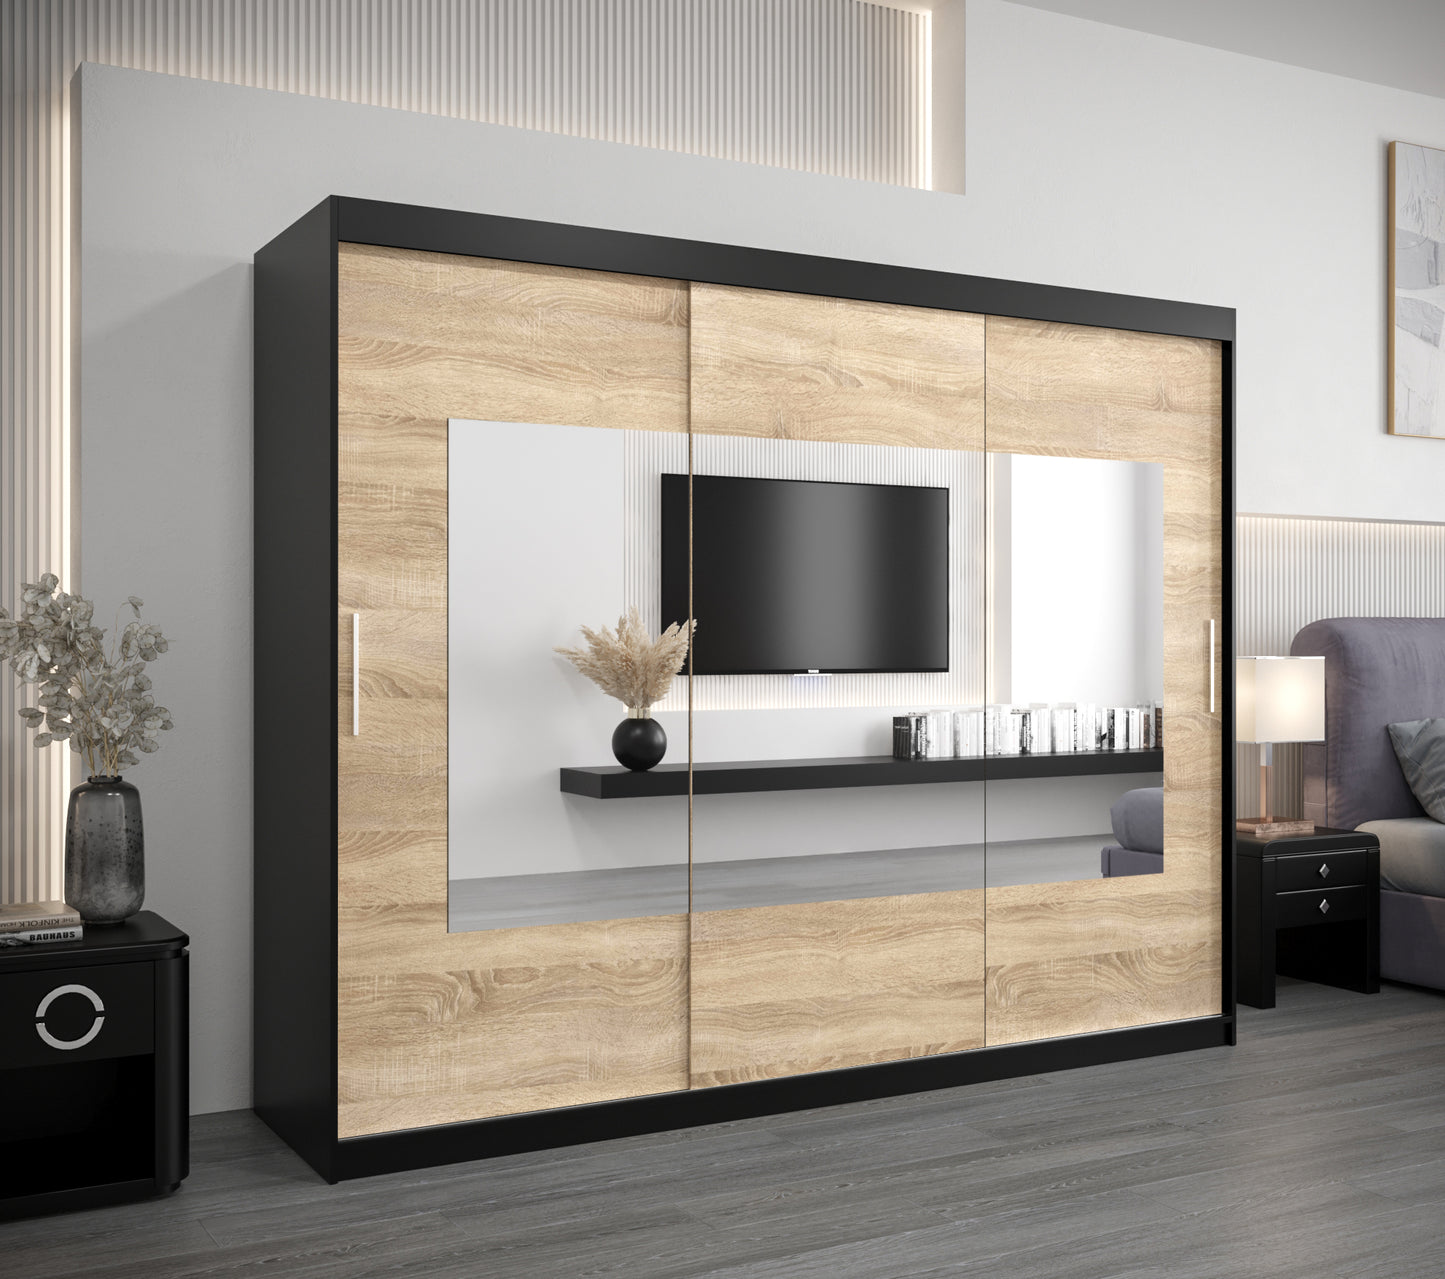 TORINA - Wardrobe Sliding Doors Mirrors Colour Combinations Drawers Optional ASSEMBLY INCLUDED  >250cm x 200cm<